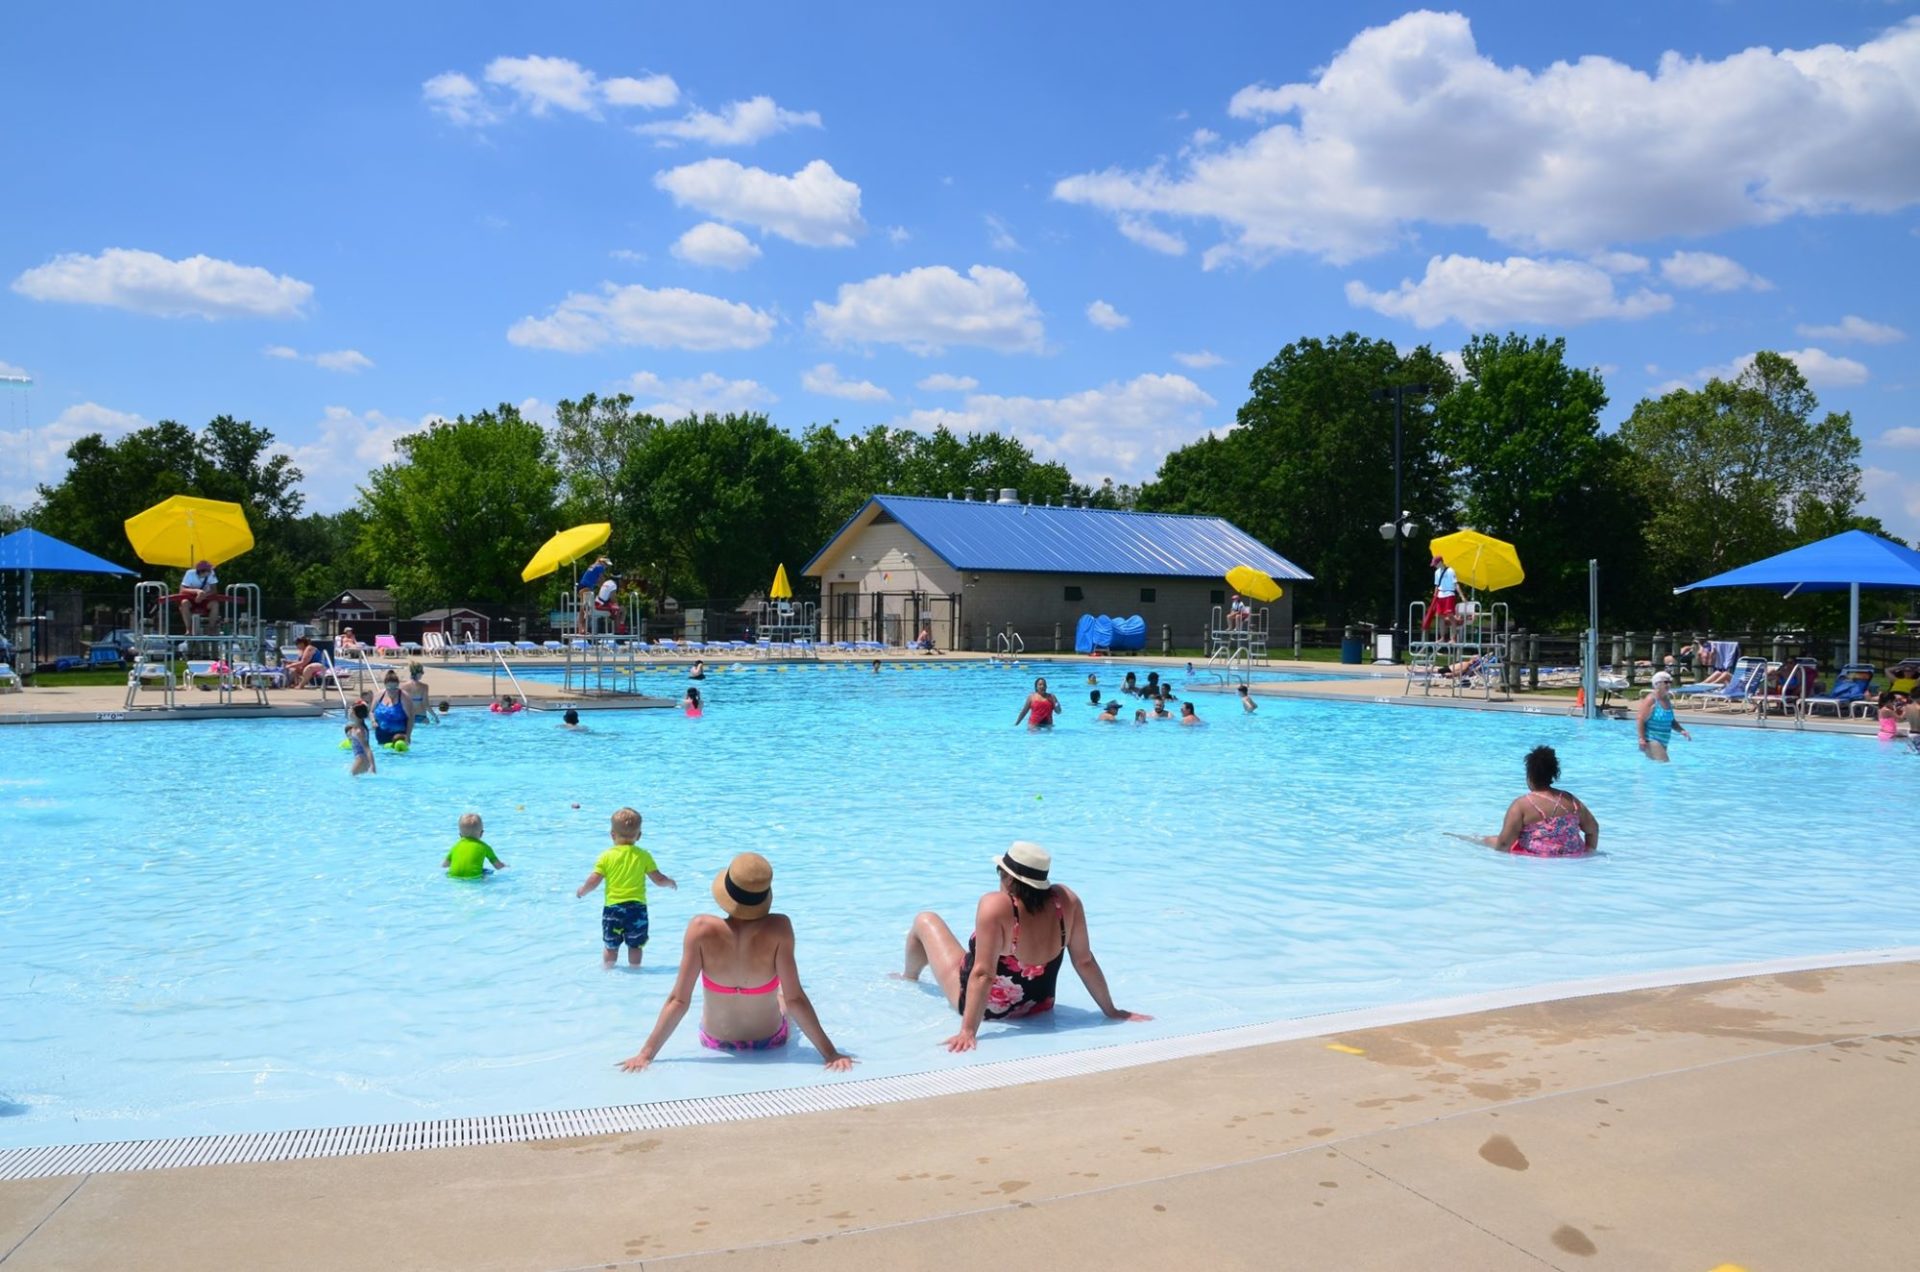 Wide shot of a large swimming pool with zero entry. There are people scattered throughout, and lifeguard chairs with yellow umbrellas at various spots around the pool.